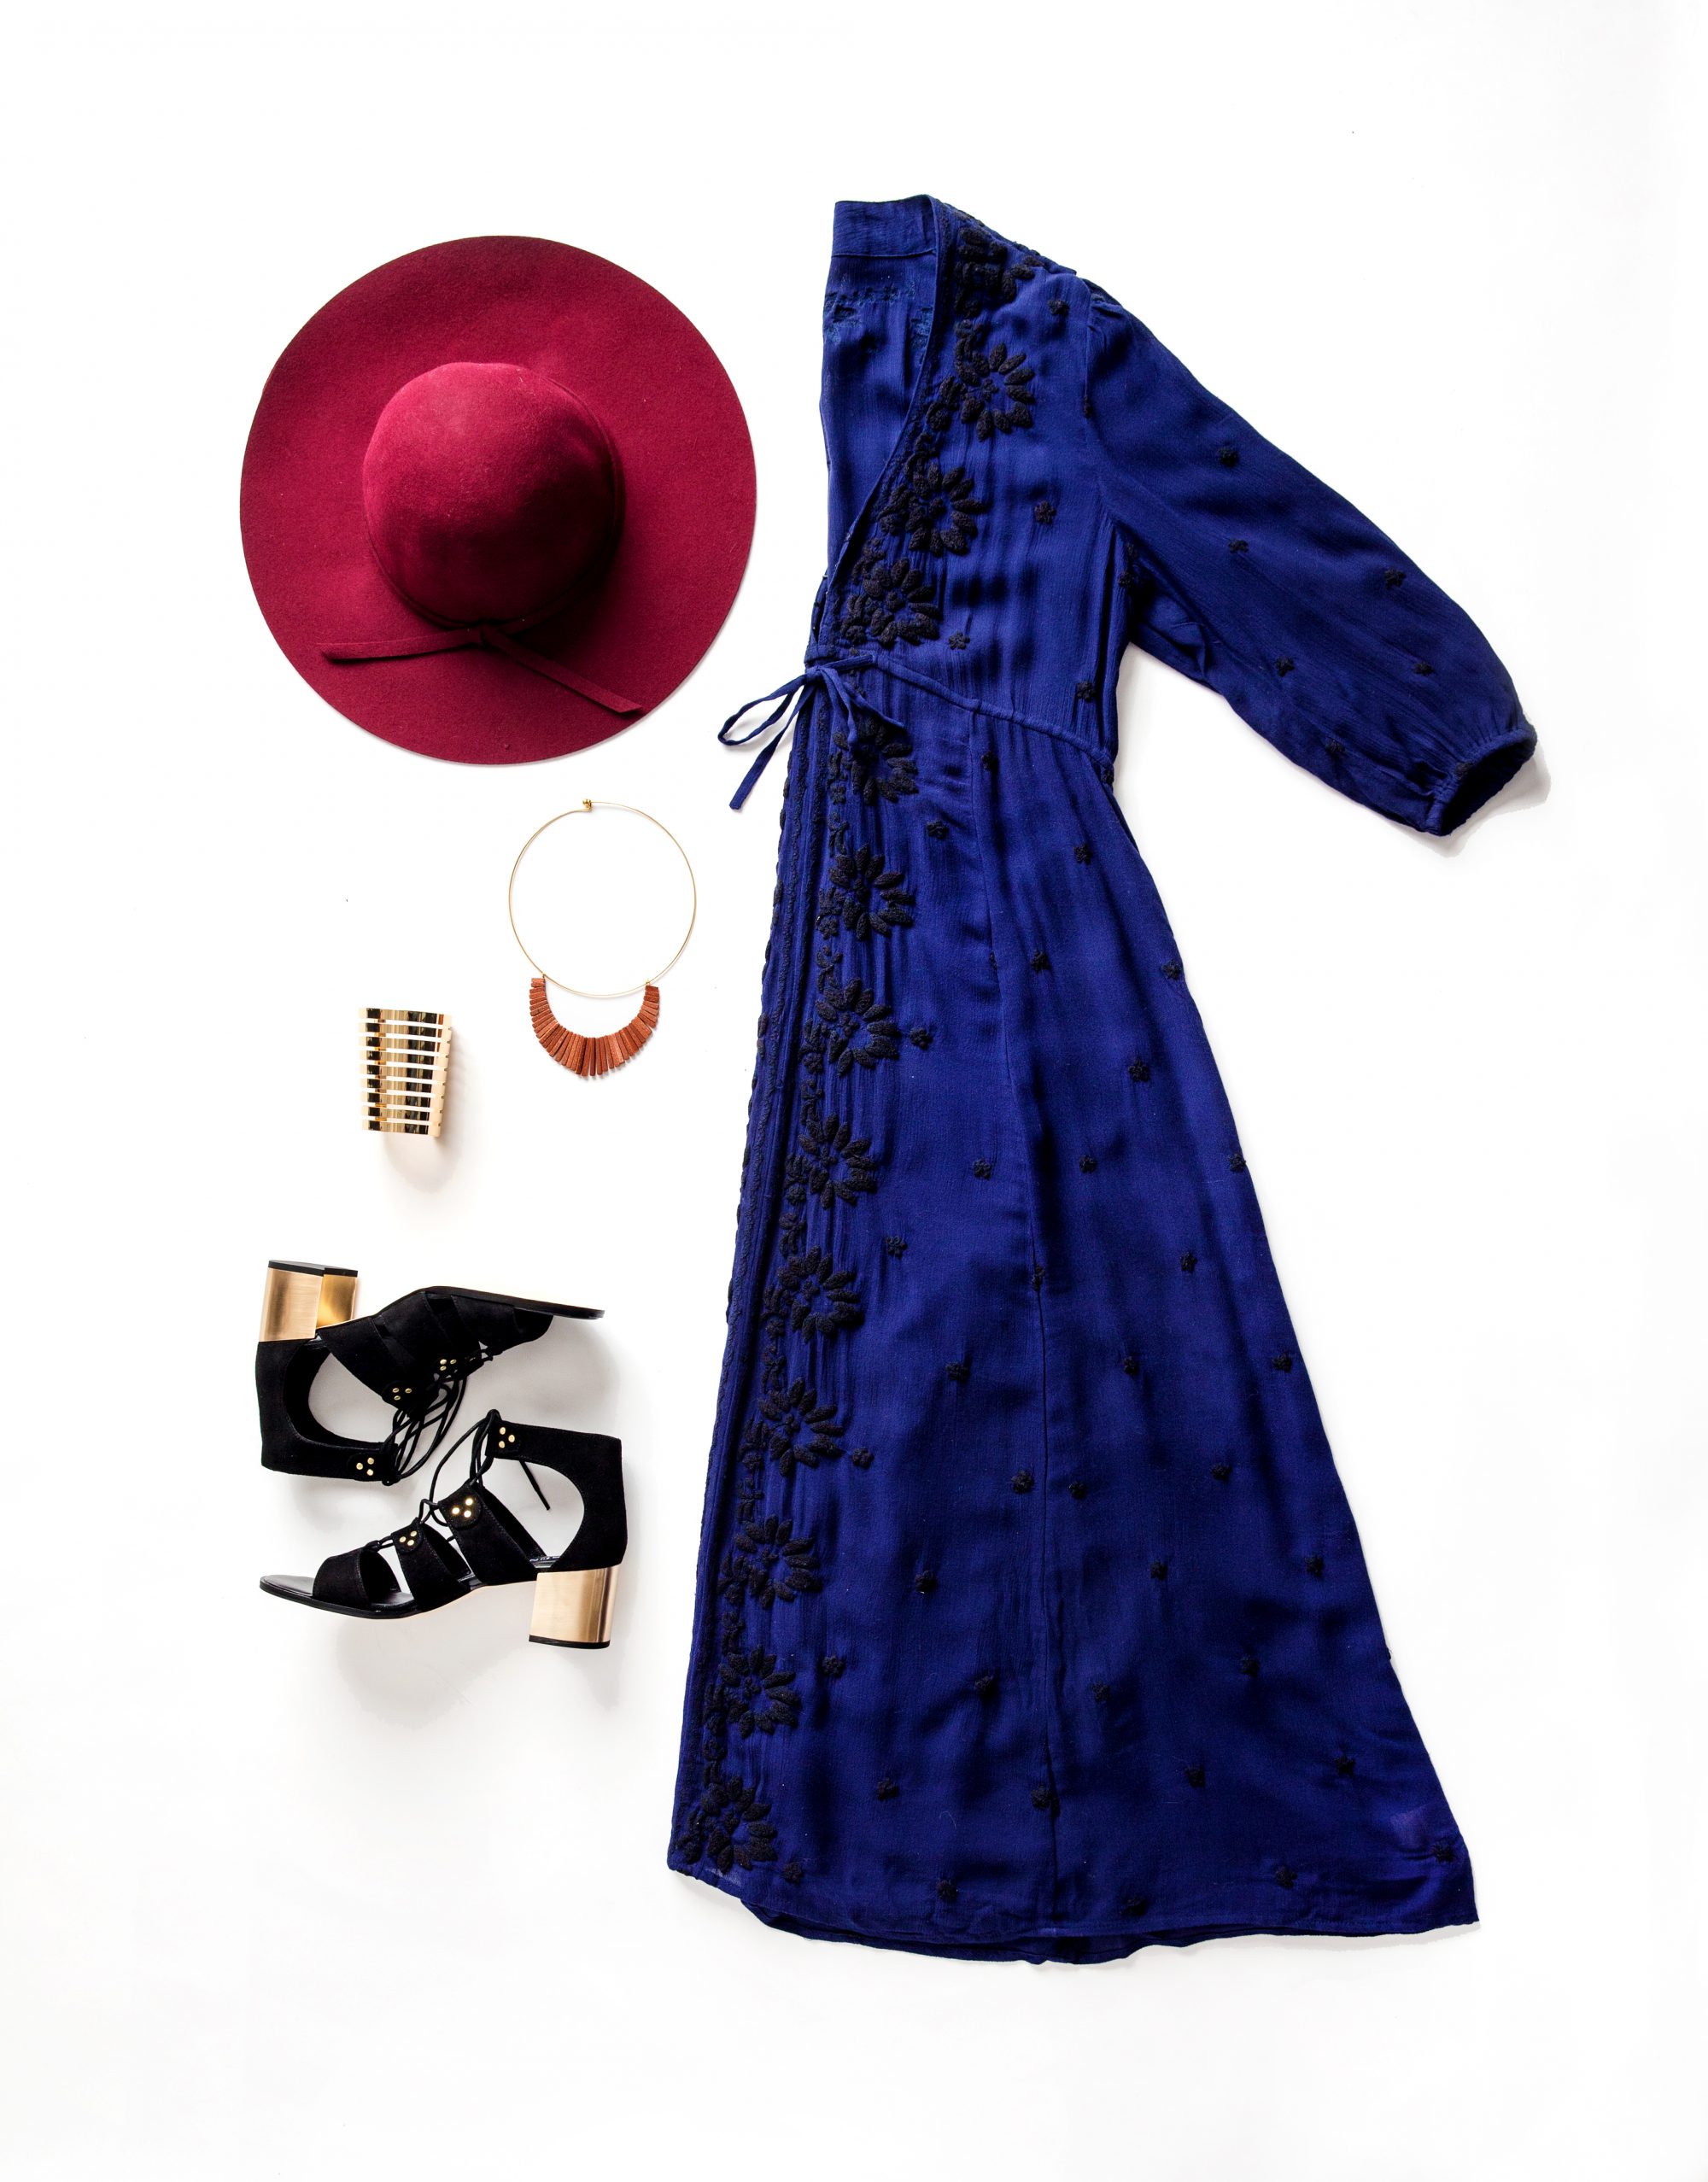 Outfit Grid: Hat, $45,Free People dress, $185, Kiko necklace, $75, from The Bamboo Ballroom, Bracelet, $19, all from The Bamboo Ballroom, Senso shoes, $265, from Coup {Garment Boutique}